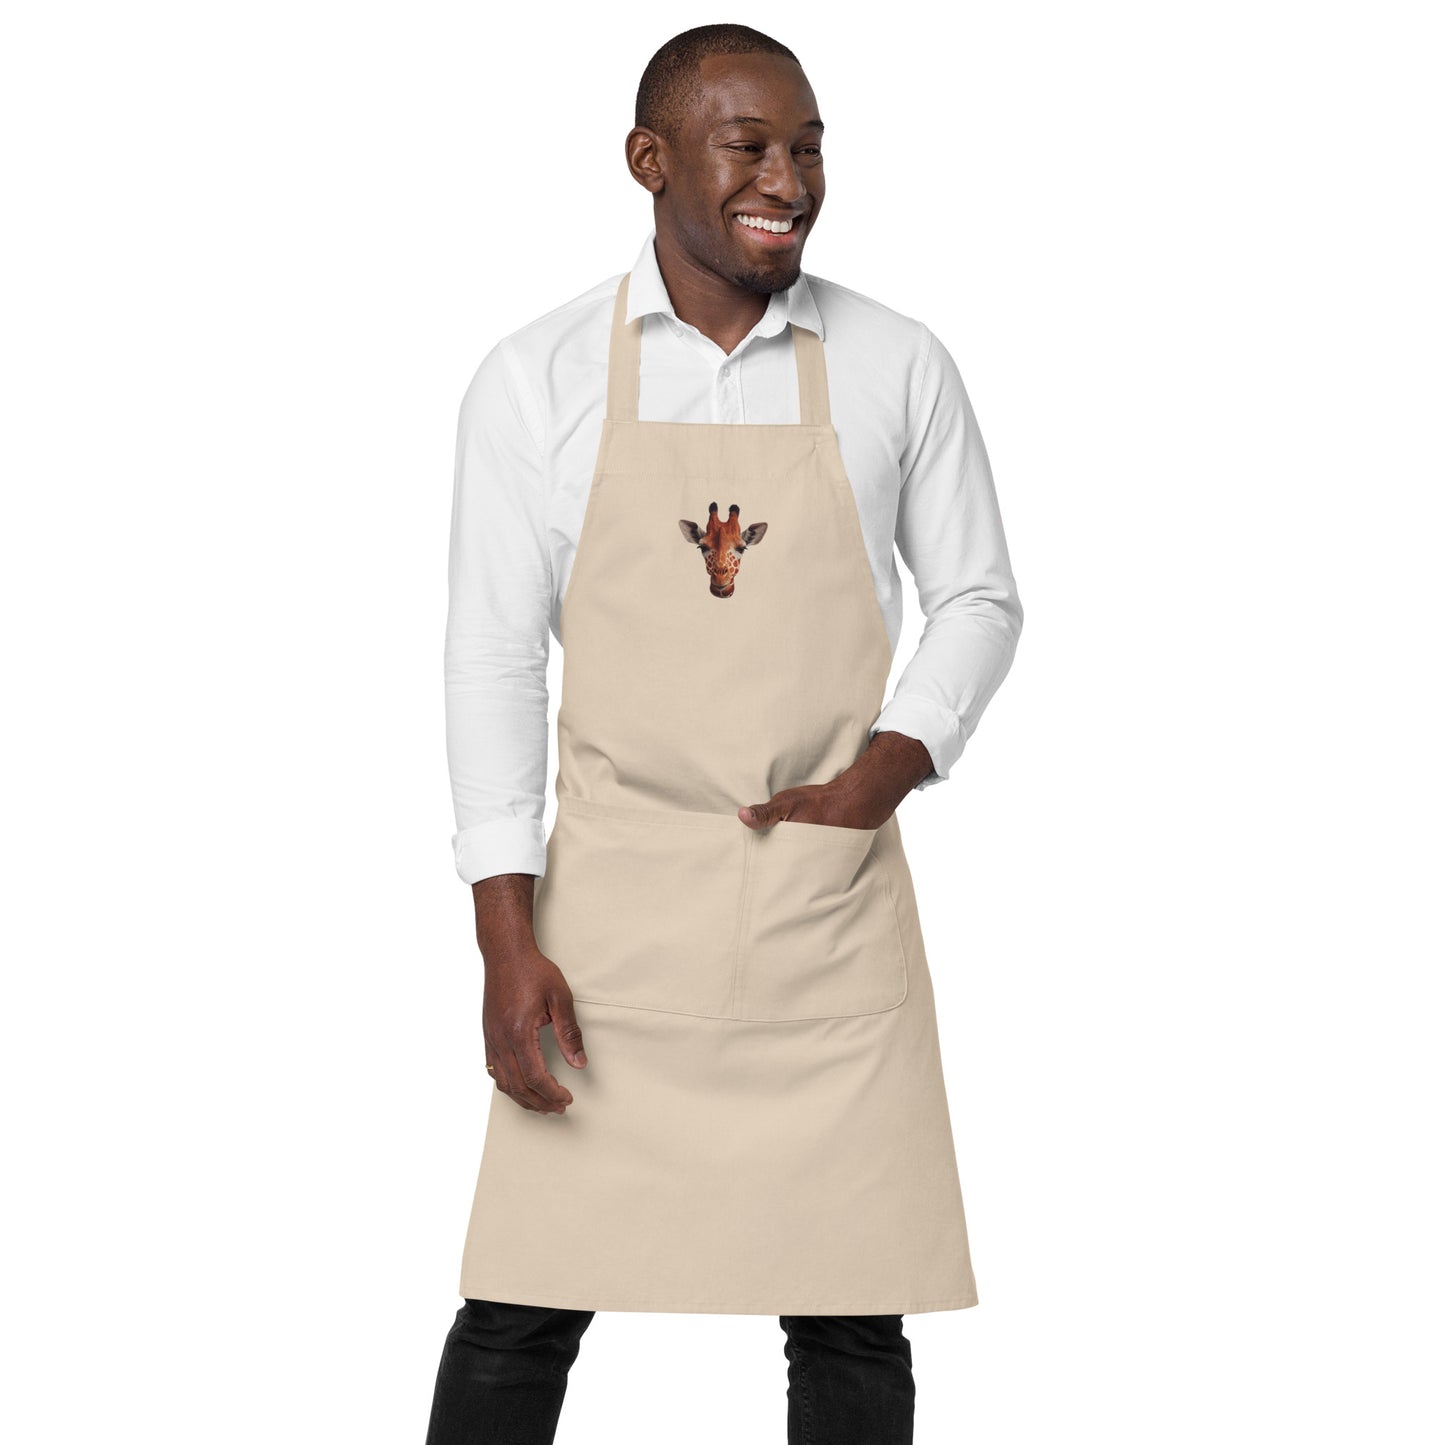 Organic cotton apron embroidered with a giraffe